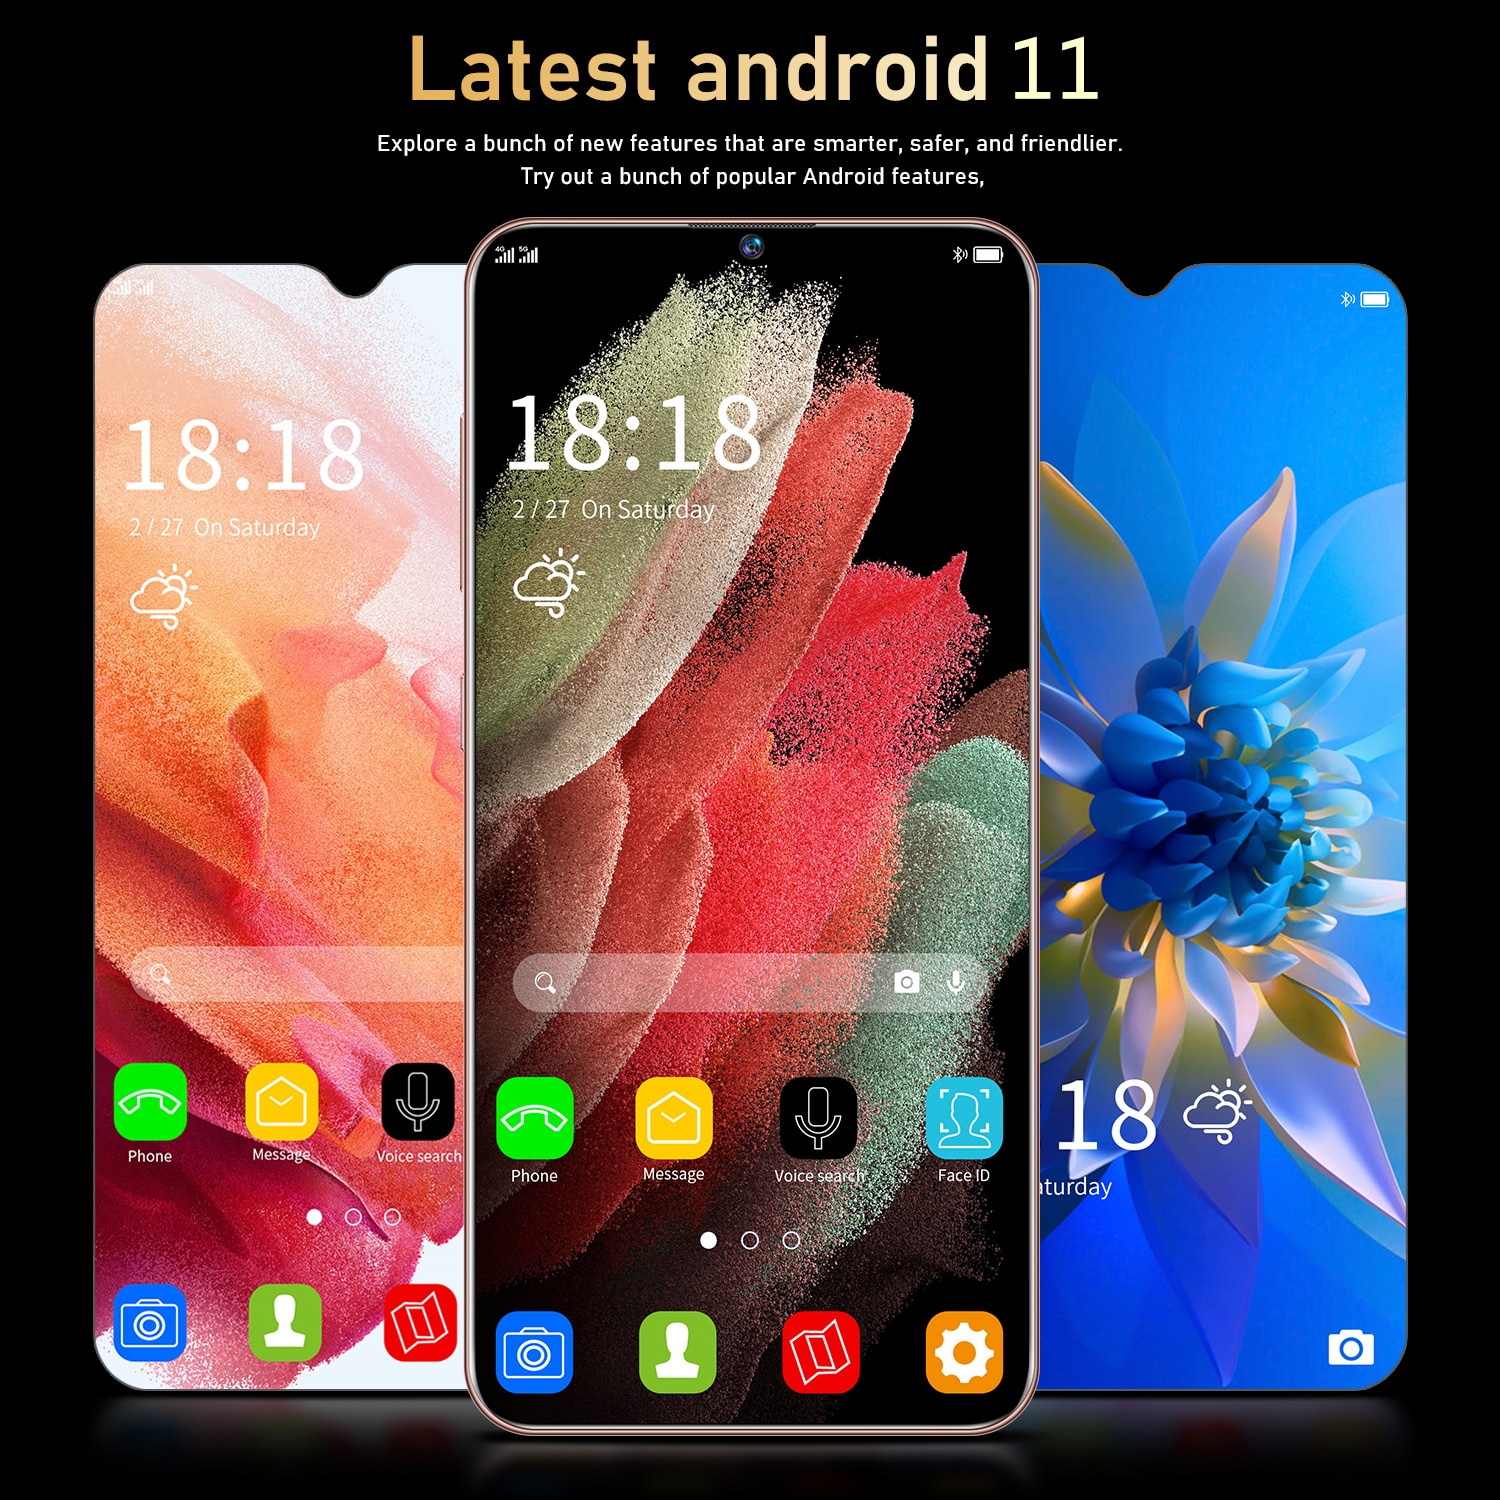 Global Version S21+ Ultra 6.7 Inch Smartphone Android 11 6500mAh 12+512GB Full Screen Support Face ID 4G 5G Network Mobilephone